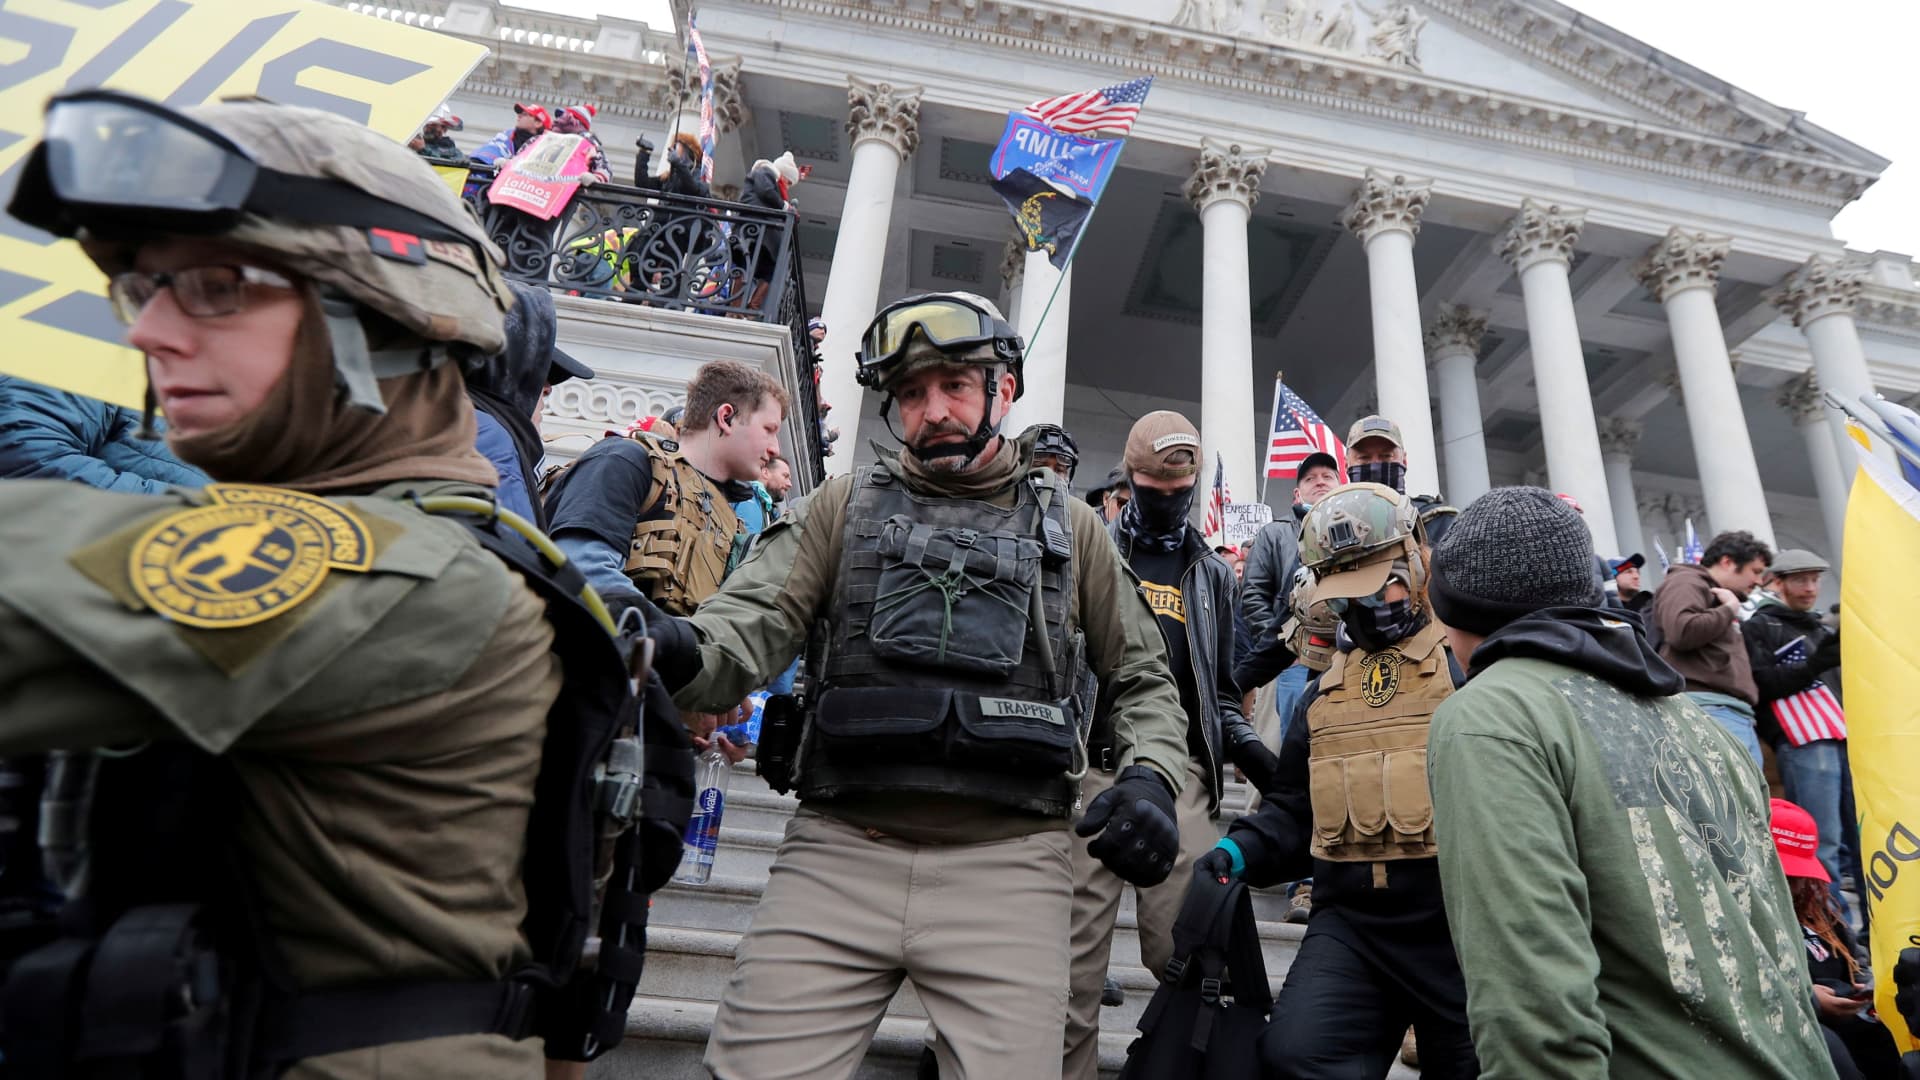 Jan. 6 Capitol riot panel briefed on multiple calls between Secret Service and Oath Keepers, NBC News reports